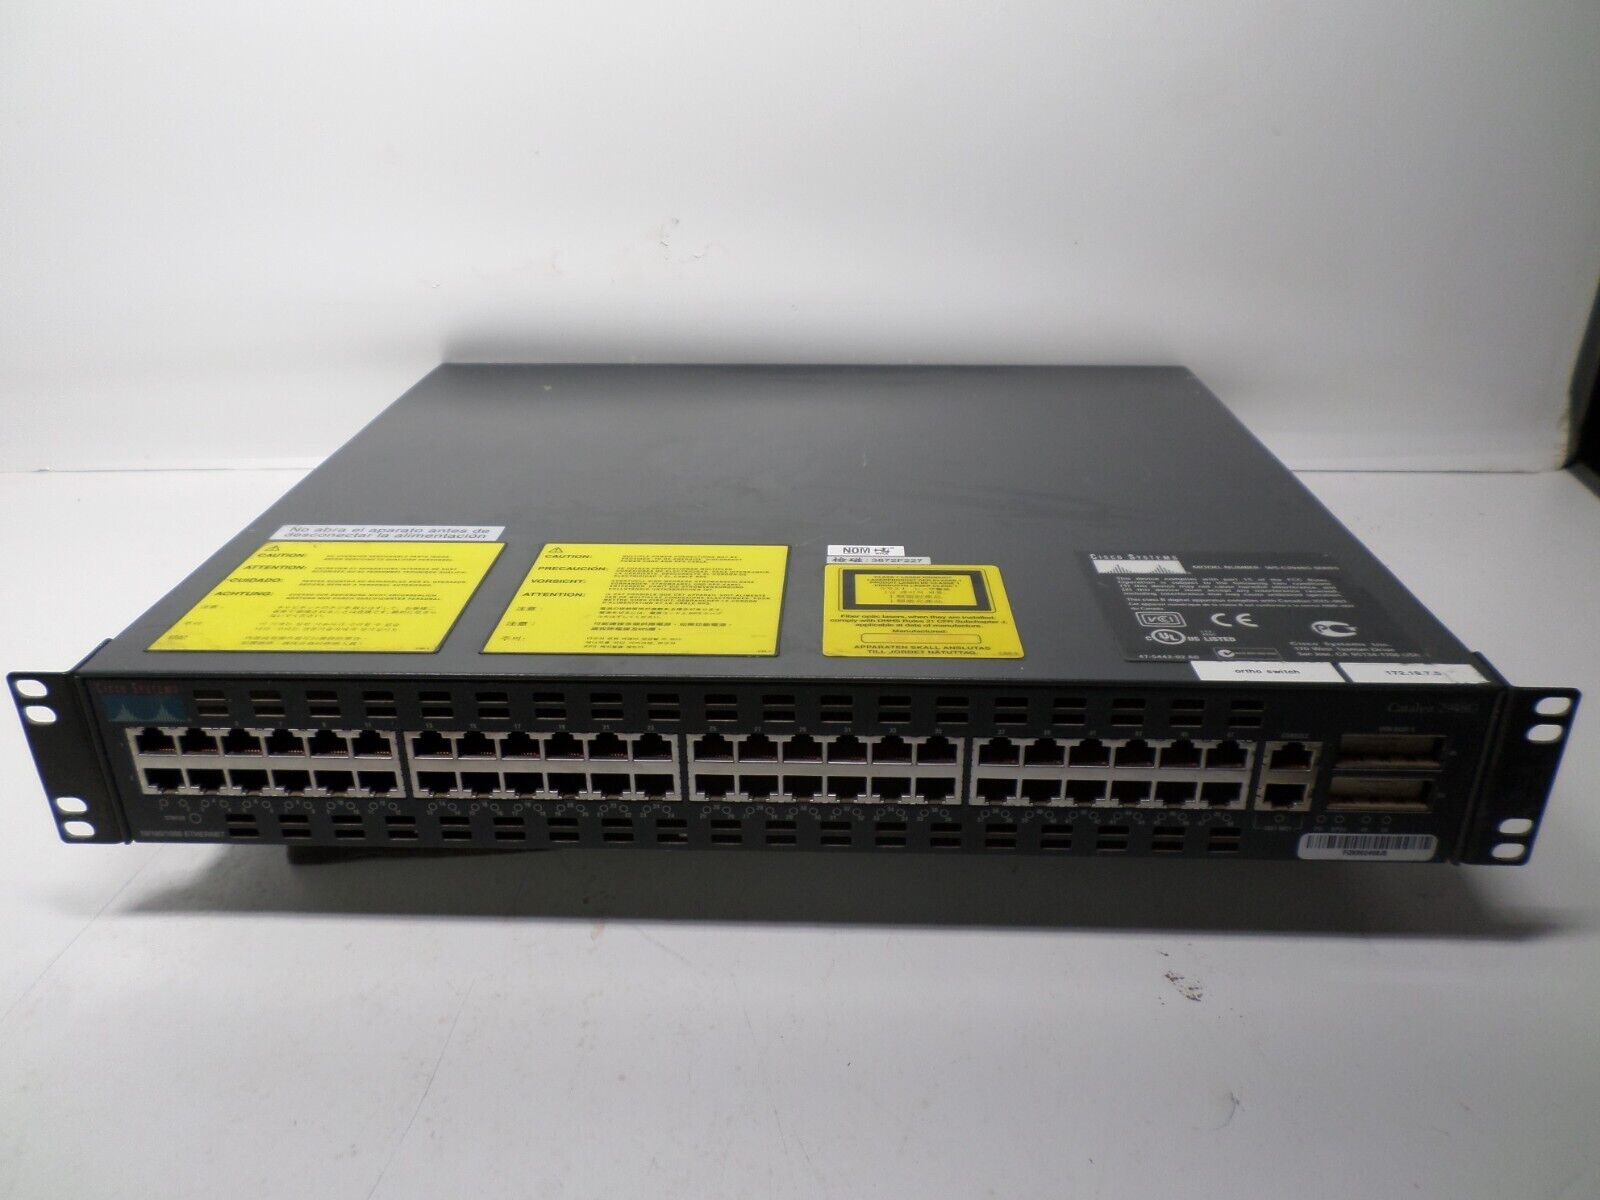 Cisco Systems Catalyst 2948G Model WS-C2948G 10/100 48-Port Ethernet Switch